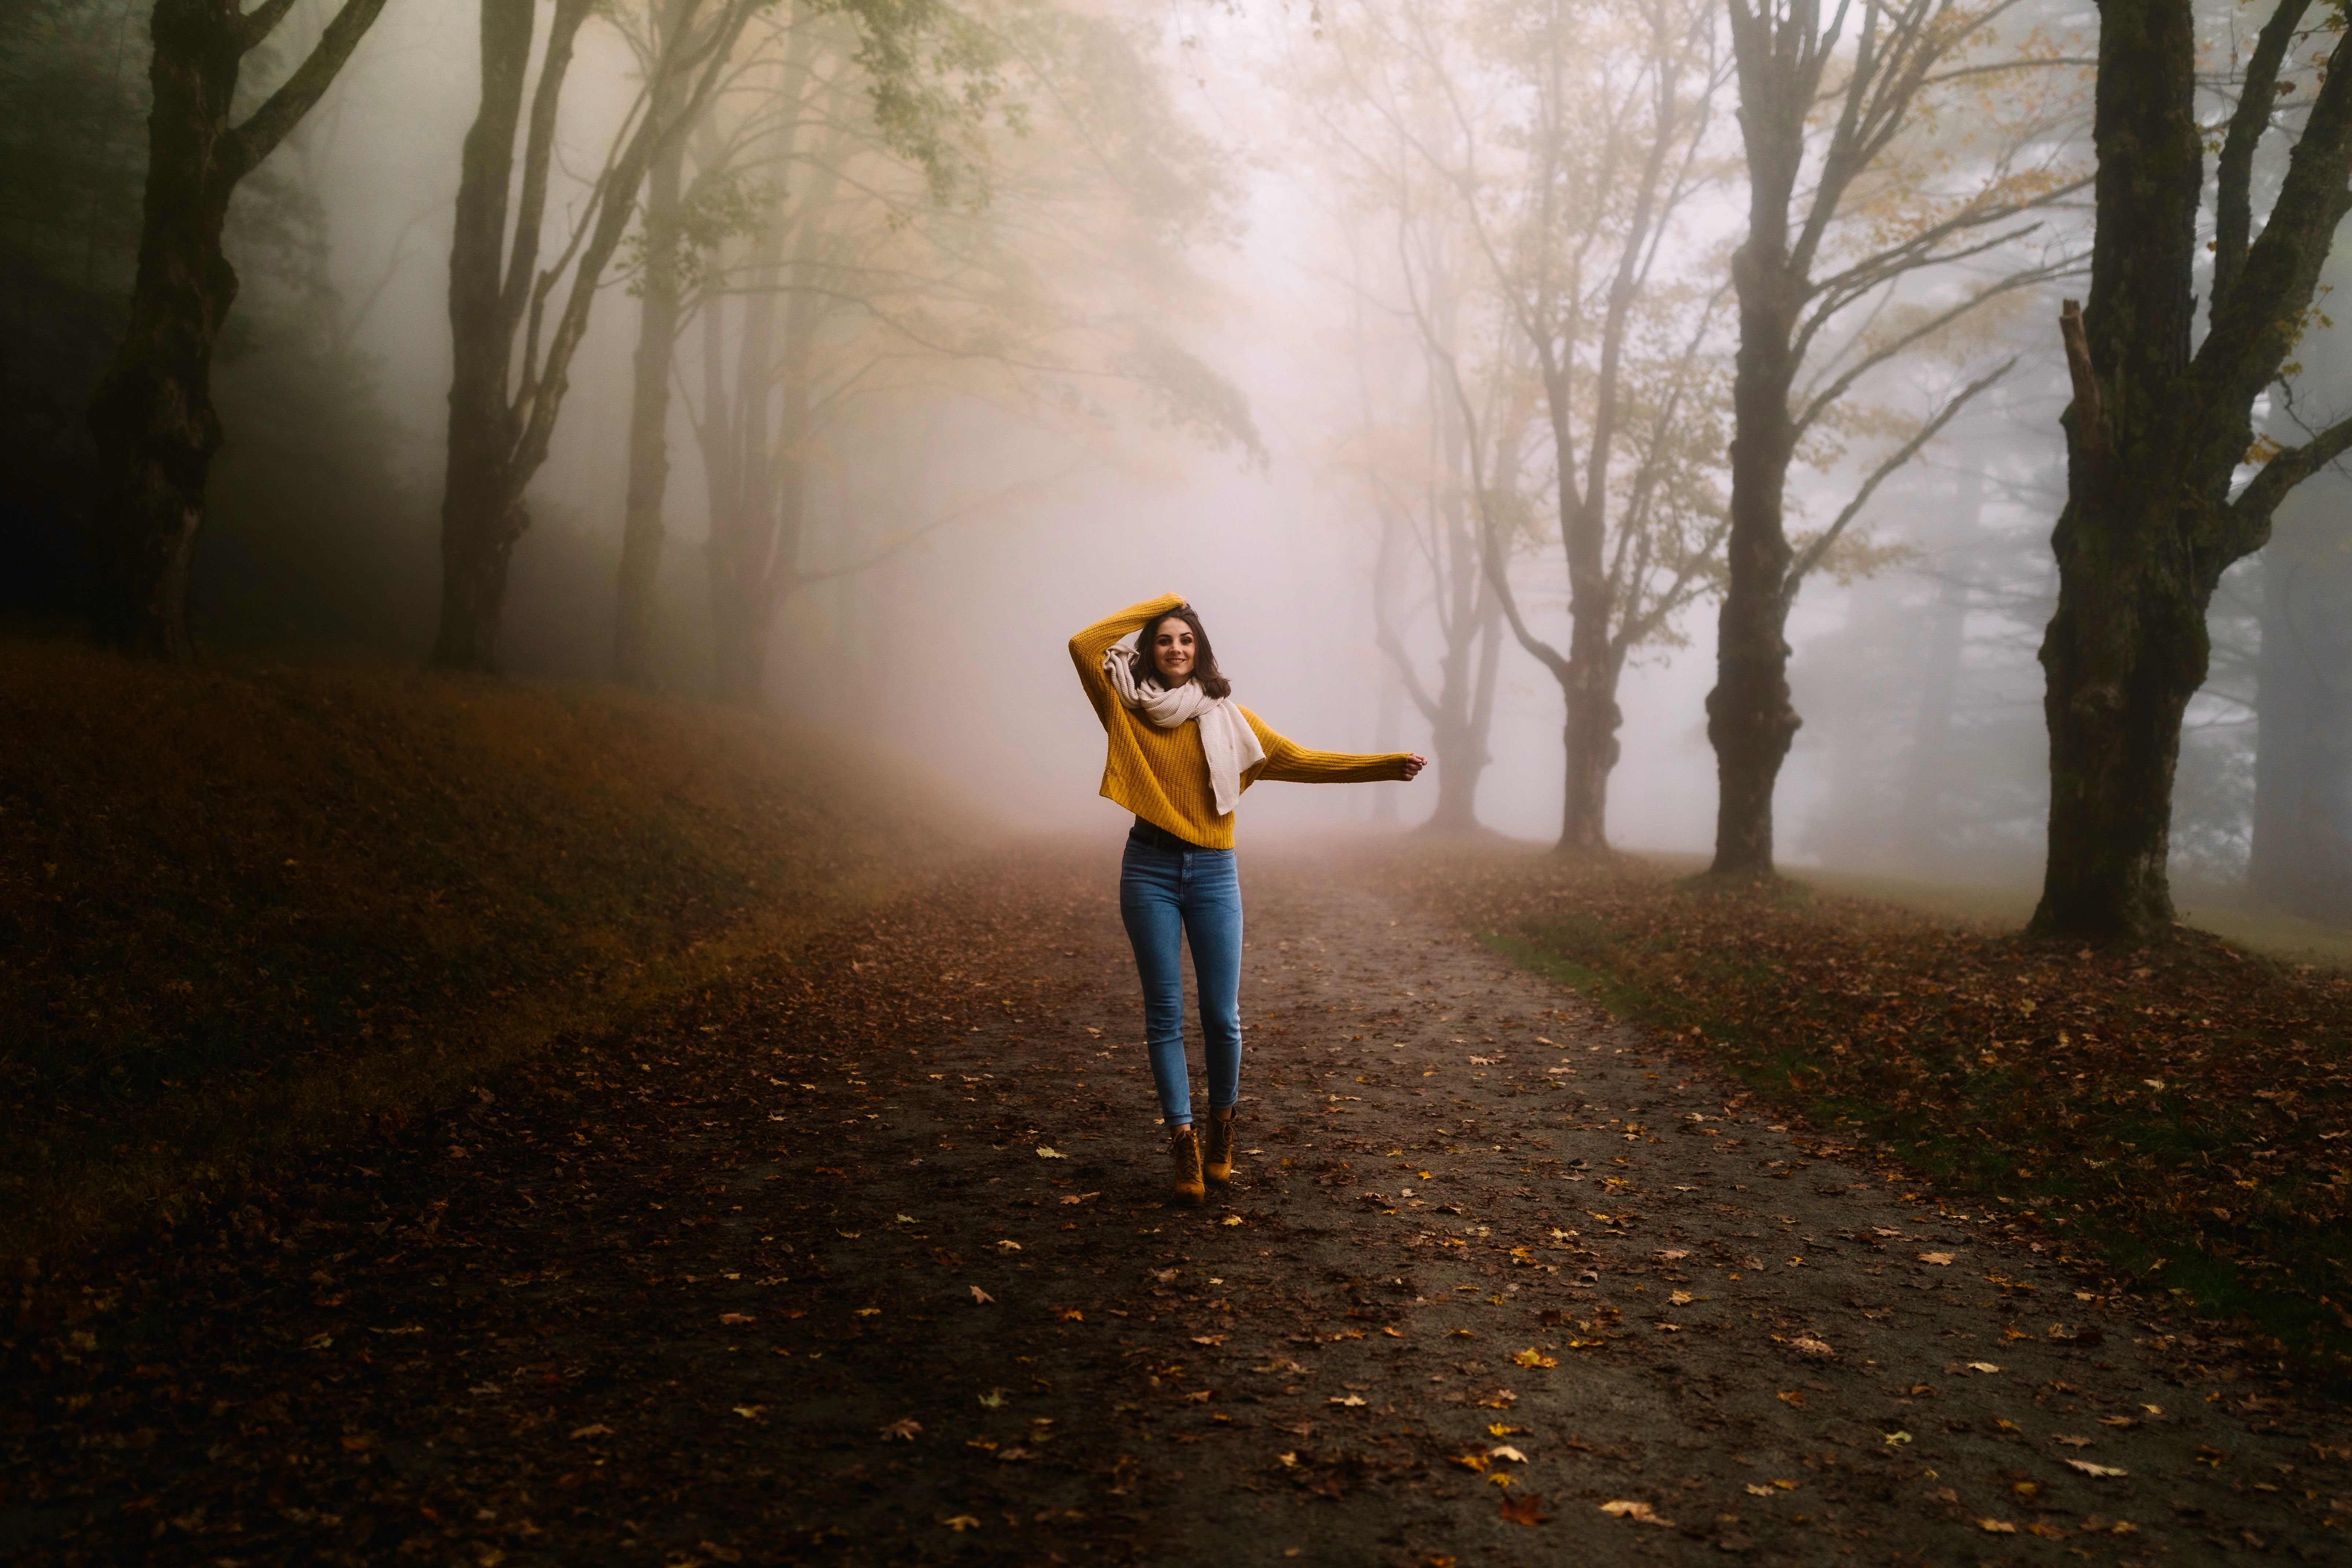 Girl Winter Alone Road Fog 5k, HD Photography, 4k Wallpaper, Image, Background, Photo and Picture